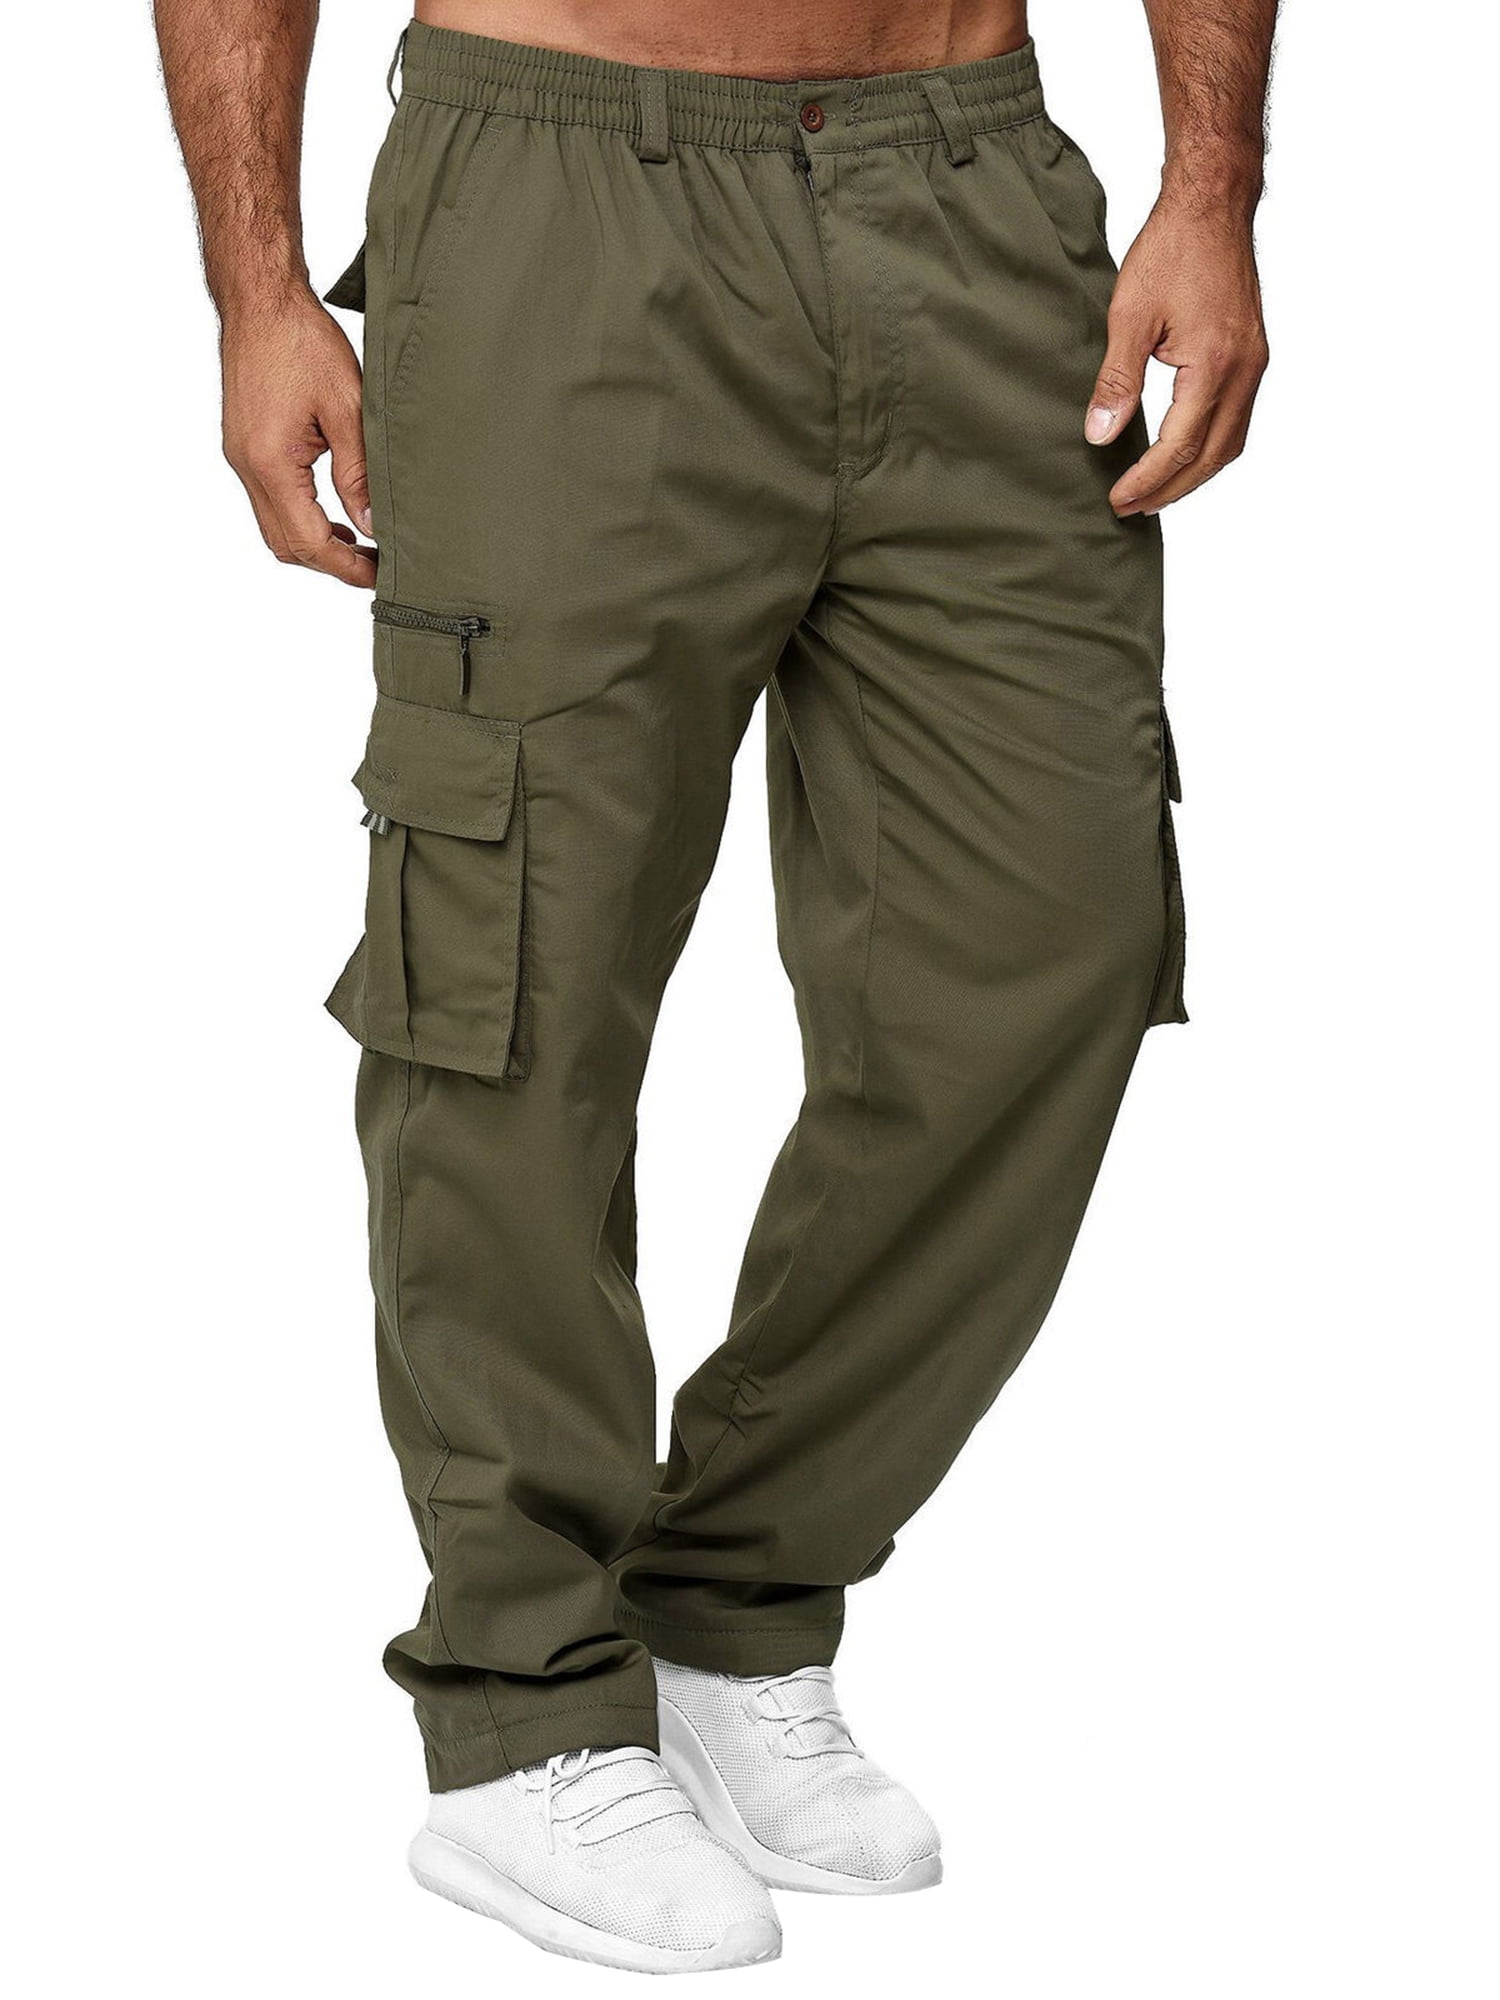 Mens Cargo Work Pants with Side Pockets Elastic Waist Straight Military  Pants Relaxed Fit Combat Trousers